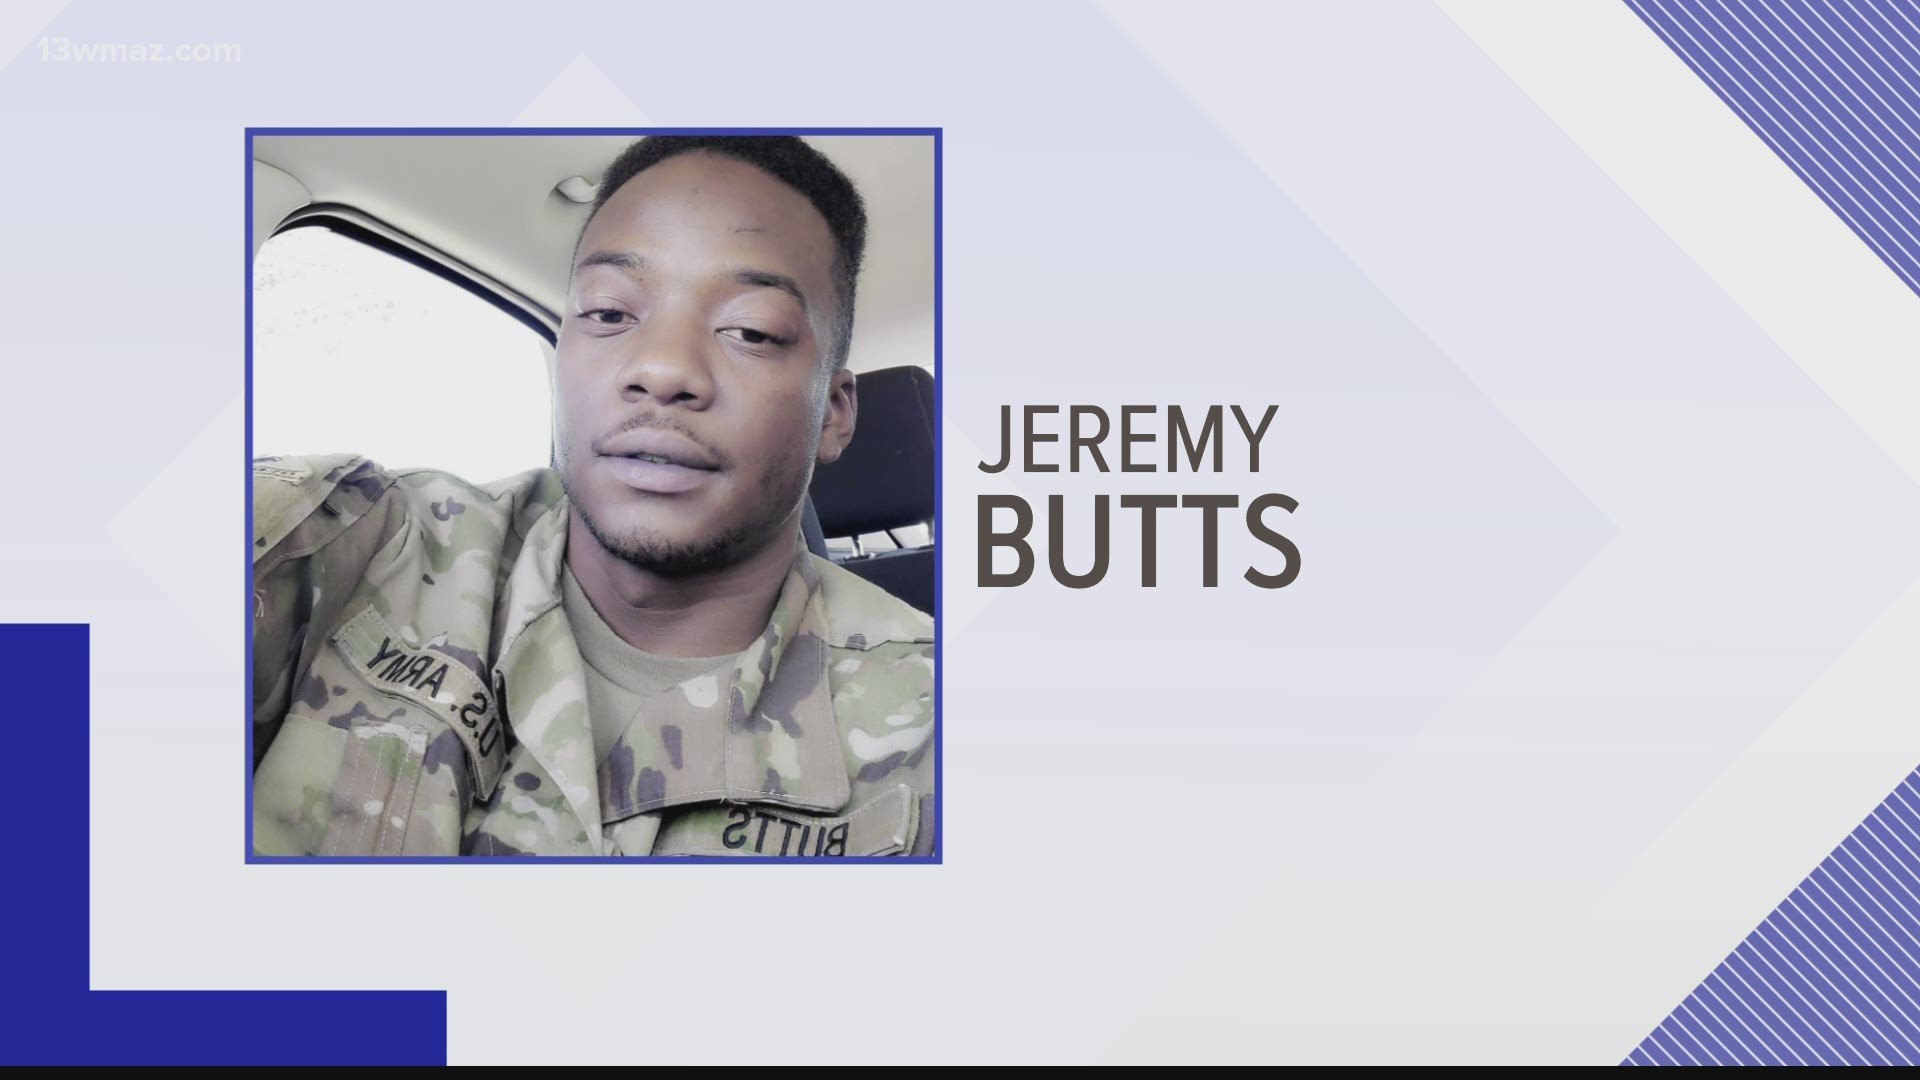 According to a Facebook post from the Jones County Sheriff's Office, the suspect, 26-year-old Jeremy Xavier Butts, has been arrested by US Marshals in El Paso, Texas